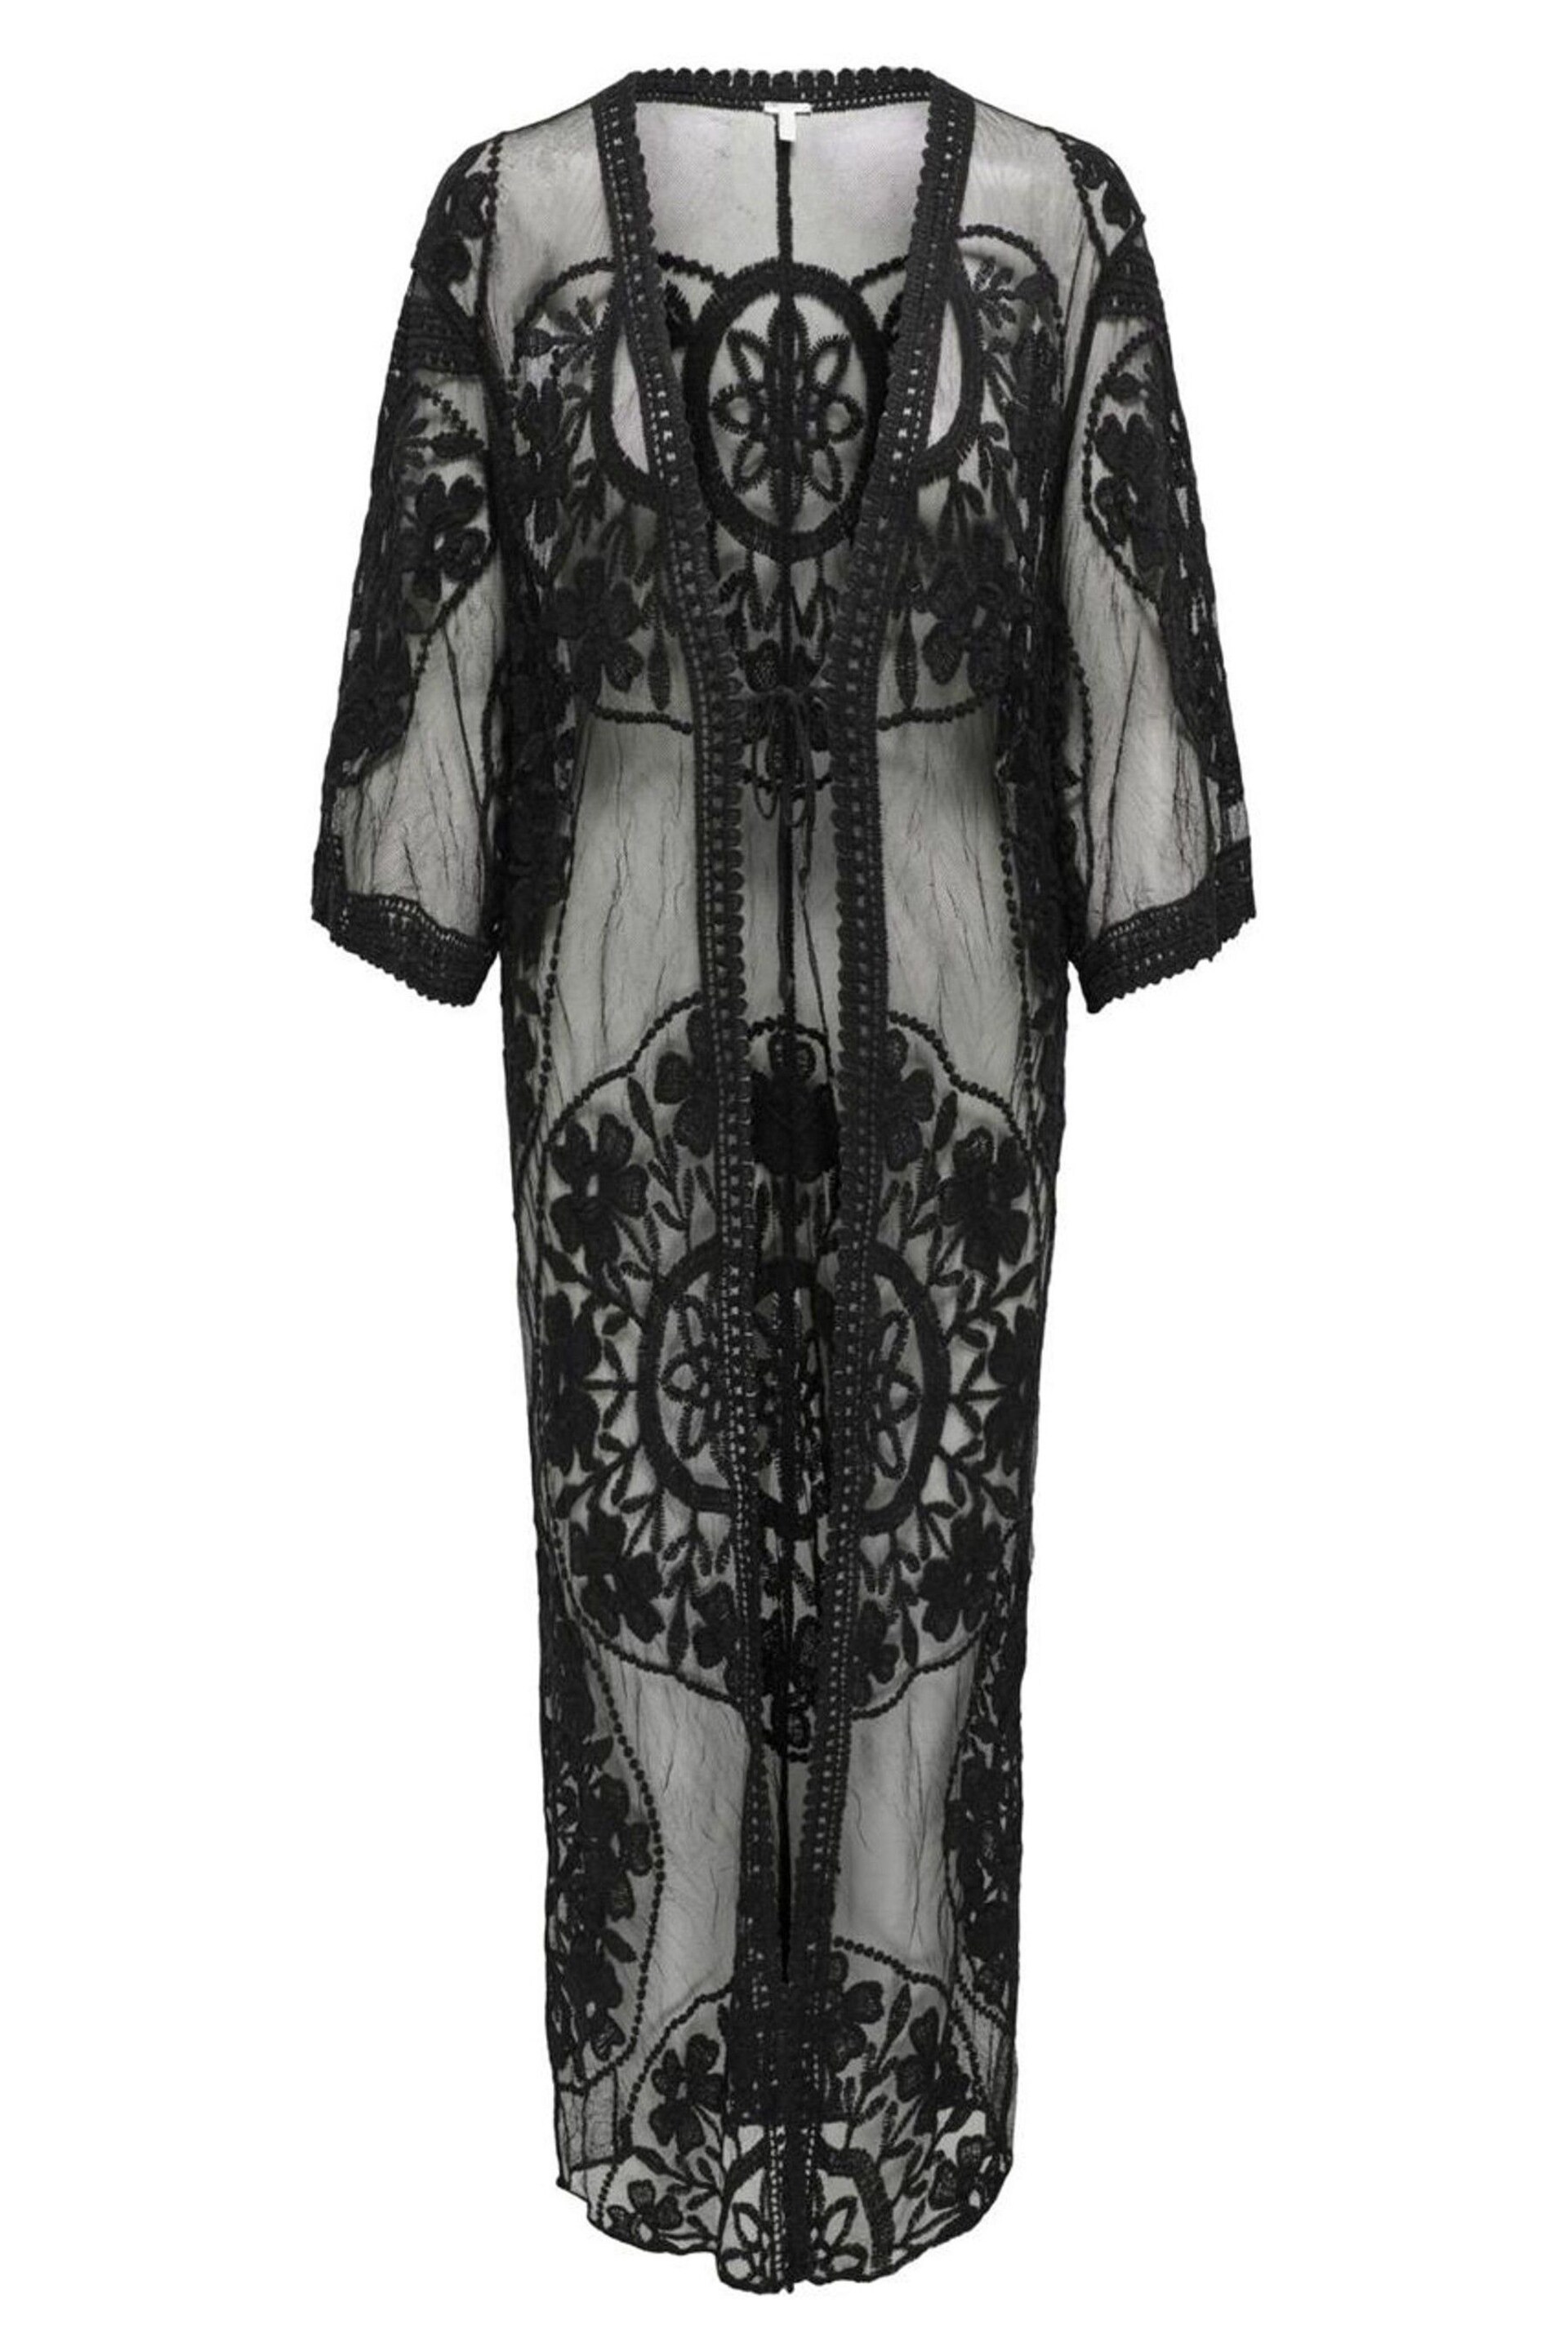 ONLY Black Embroidered Maxi Beach Cover-Up Kaftan - Image 6 of 7